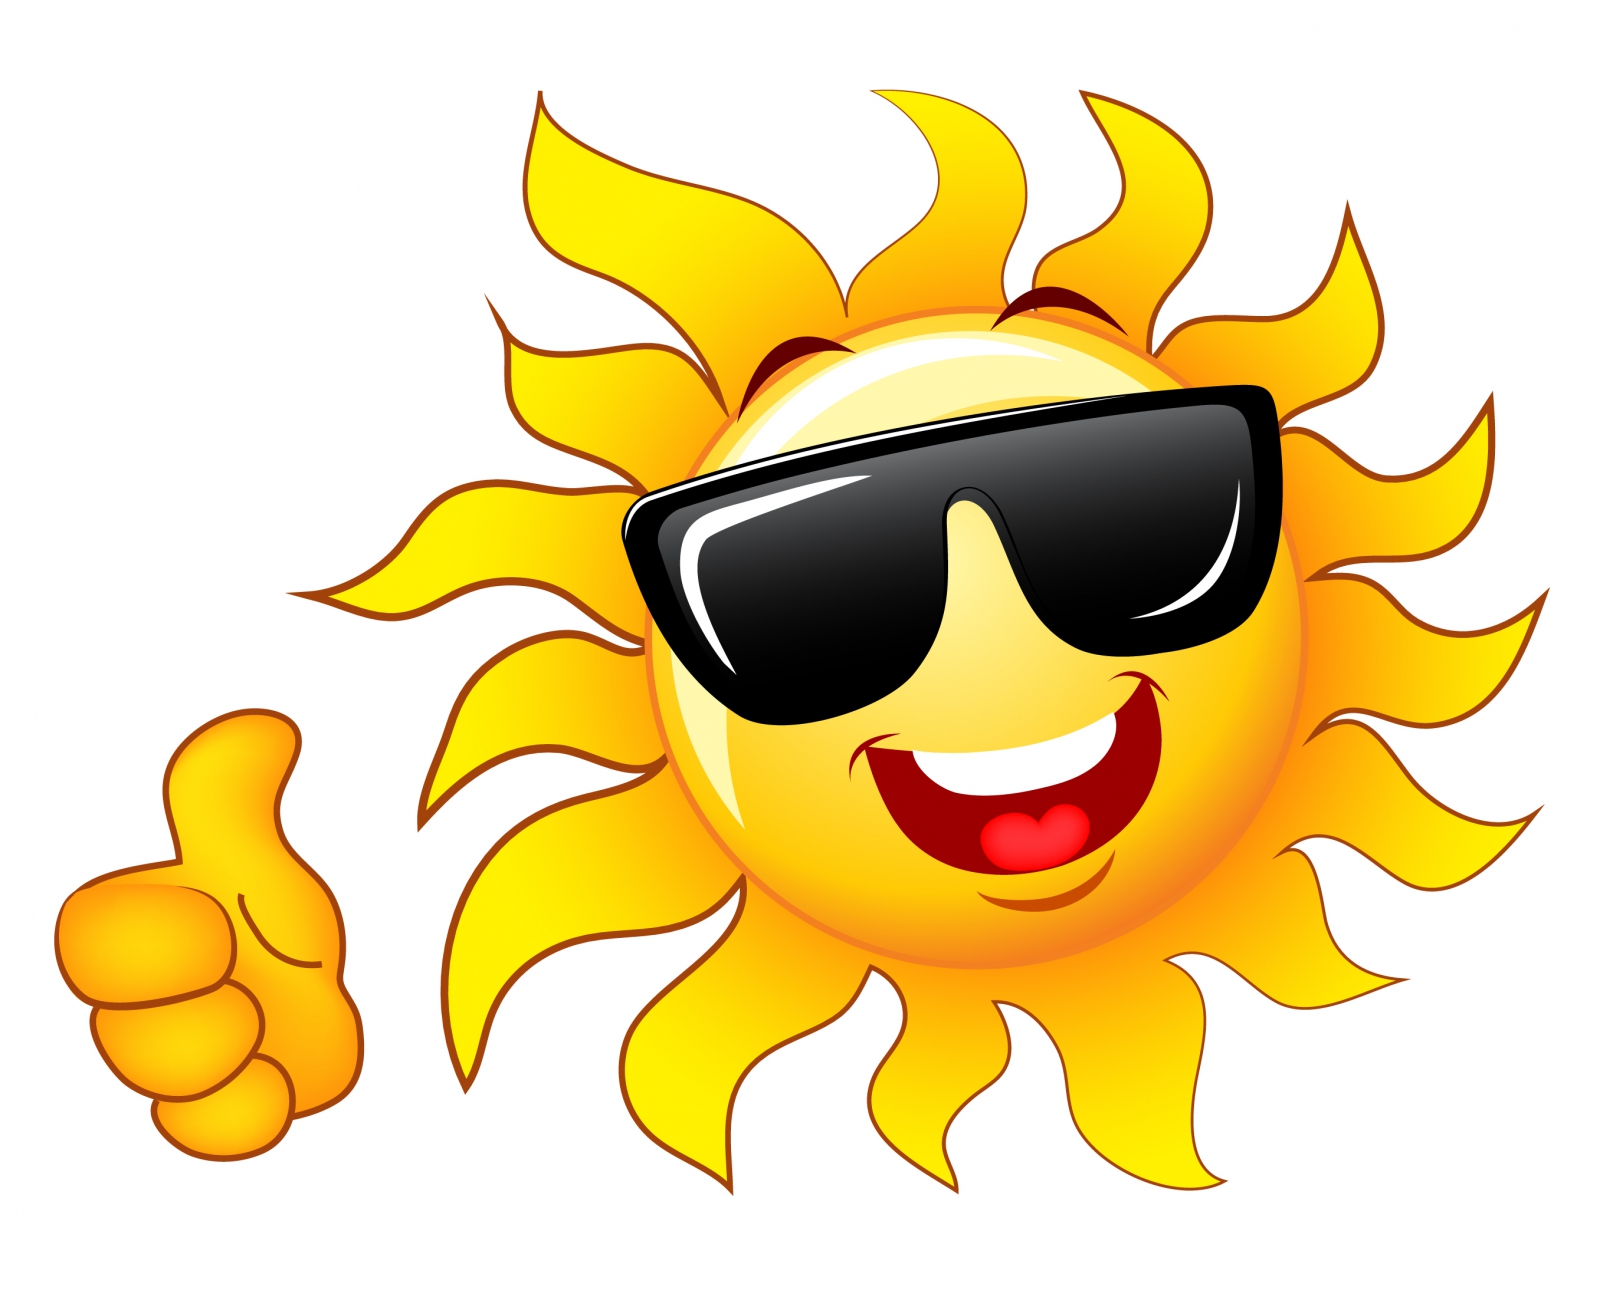 Smiling sun with sunglasses c - Sun With Sunglasses Clipart